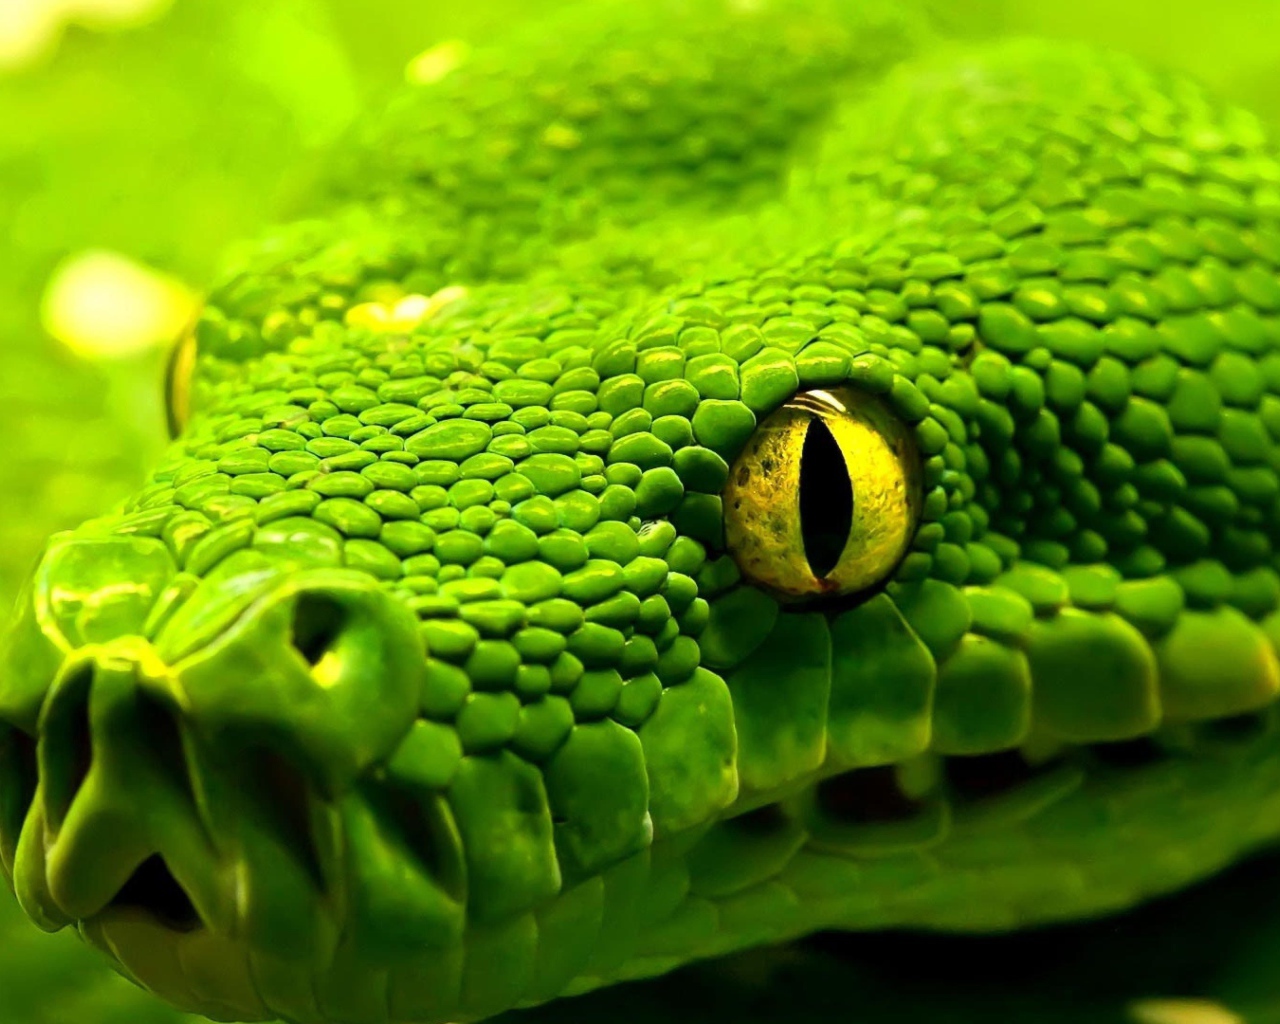 Big green snake with yellow eyes close-up